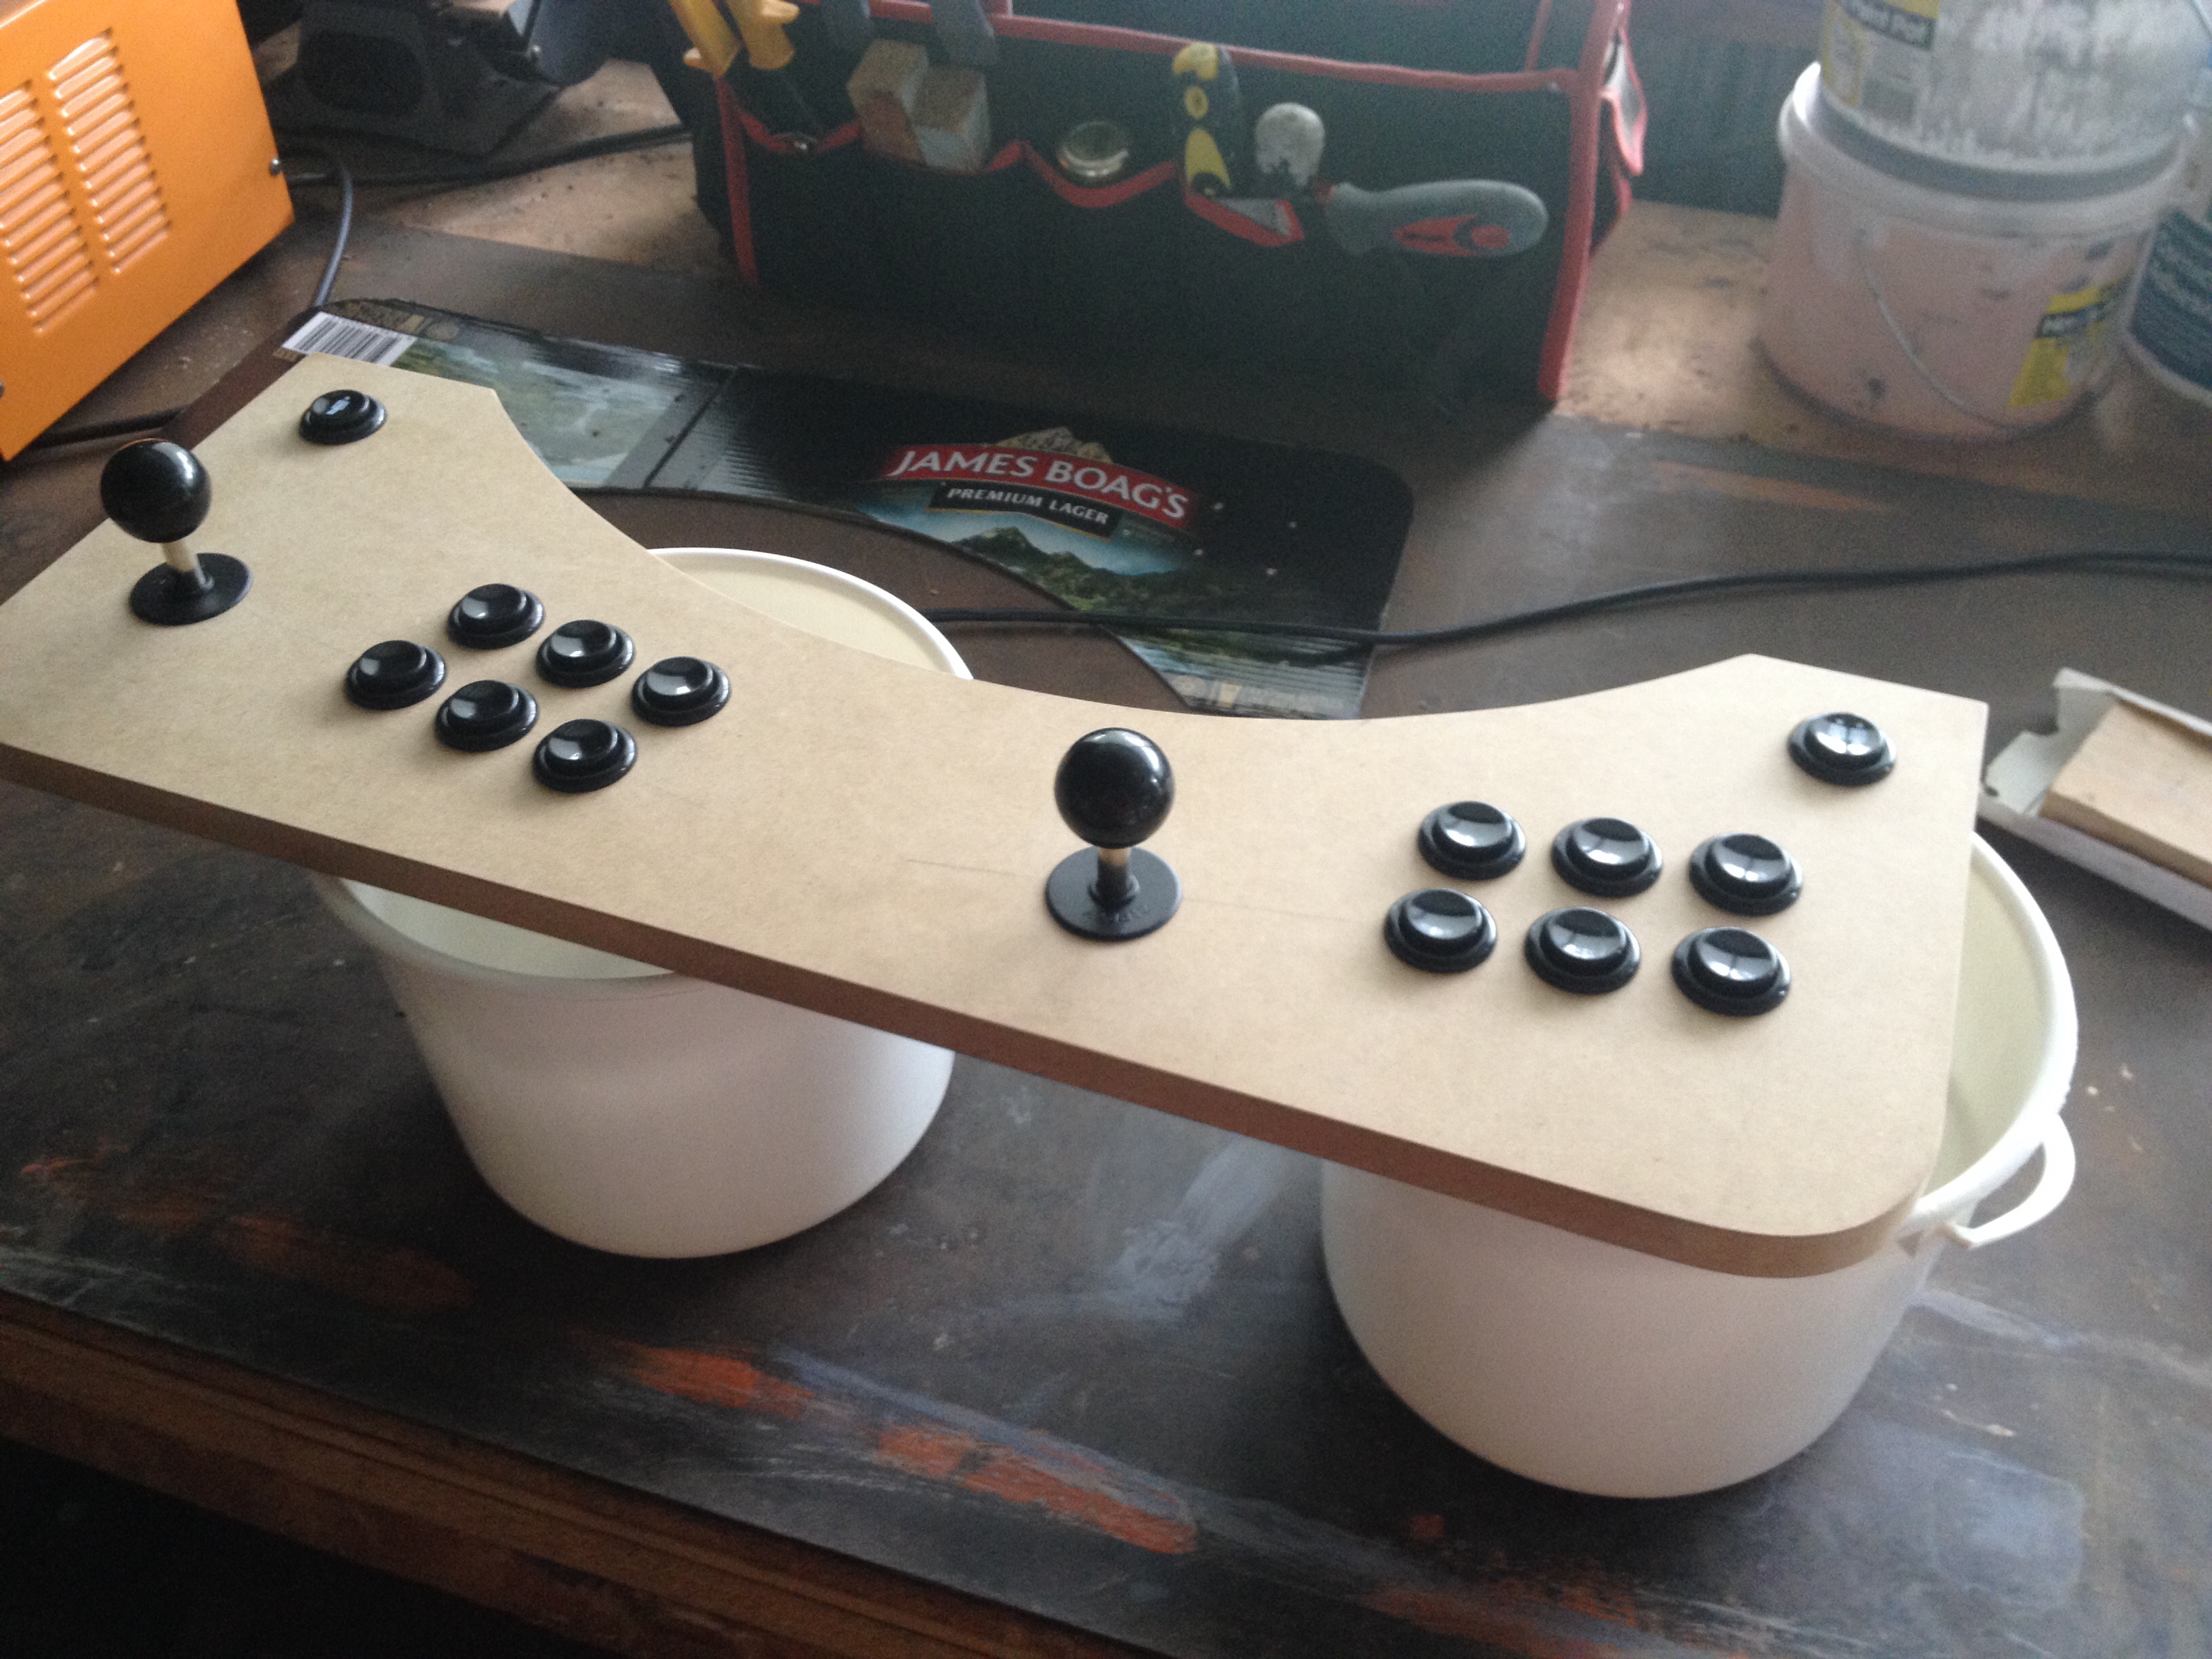 First try of buttons and joysticks